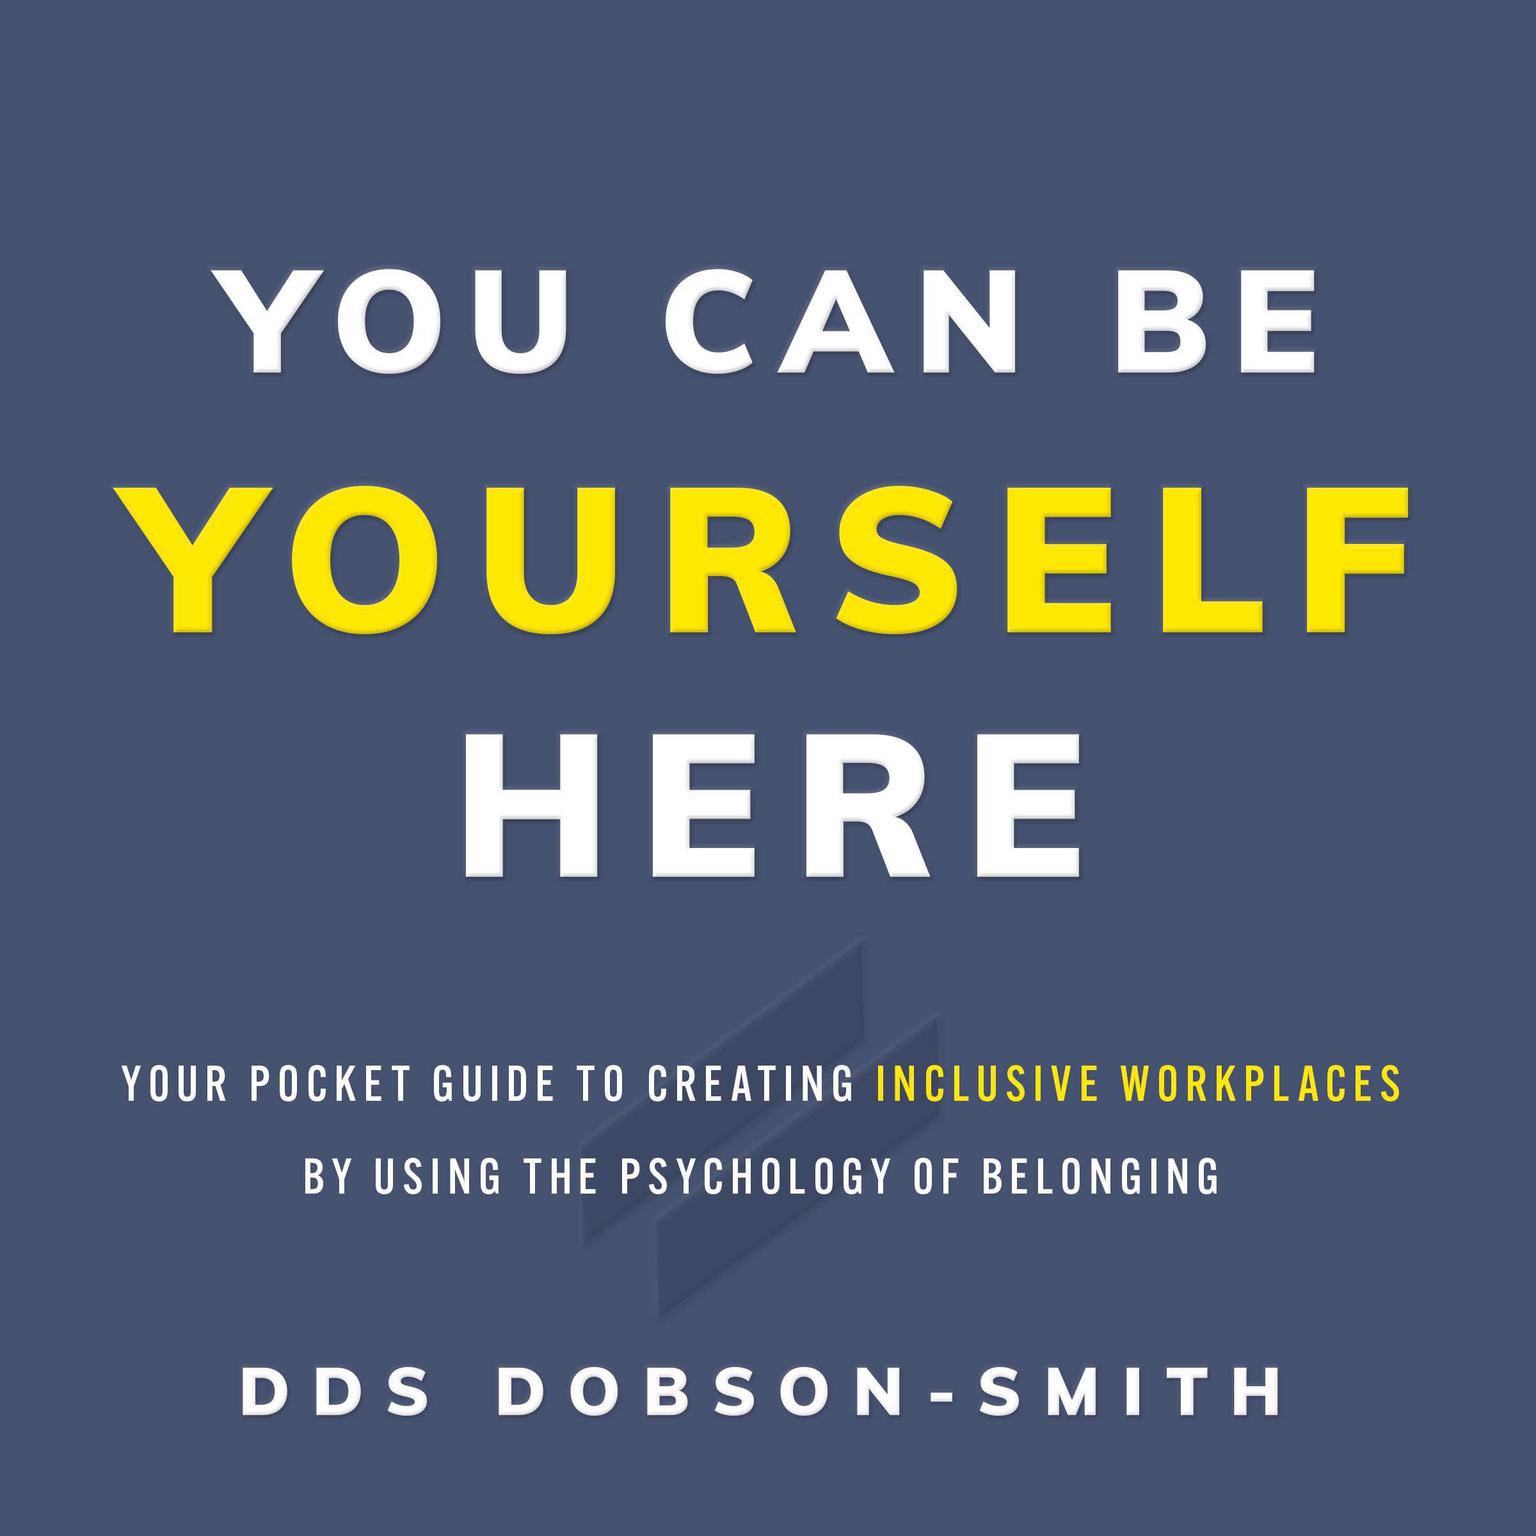 You Can Be Yourself Here: Your Pocket Guide to Creating Inclusive Workplaces by Using the Psychology of Belonging Audiobook, by DDS Dobson-Smith